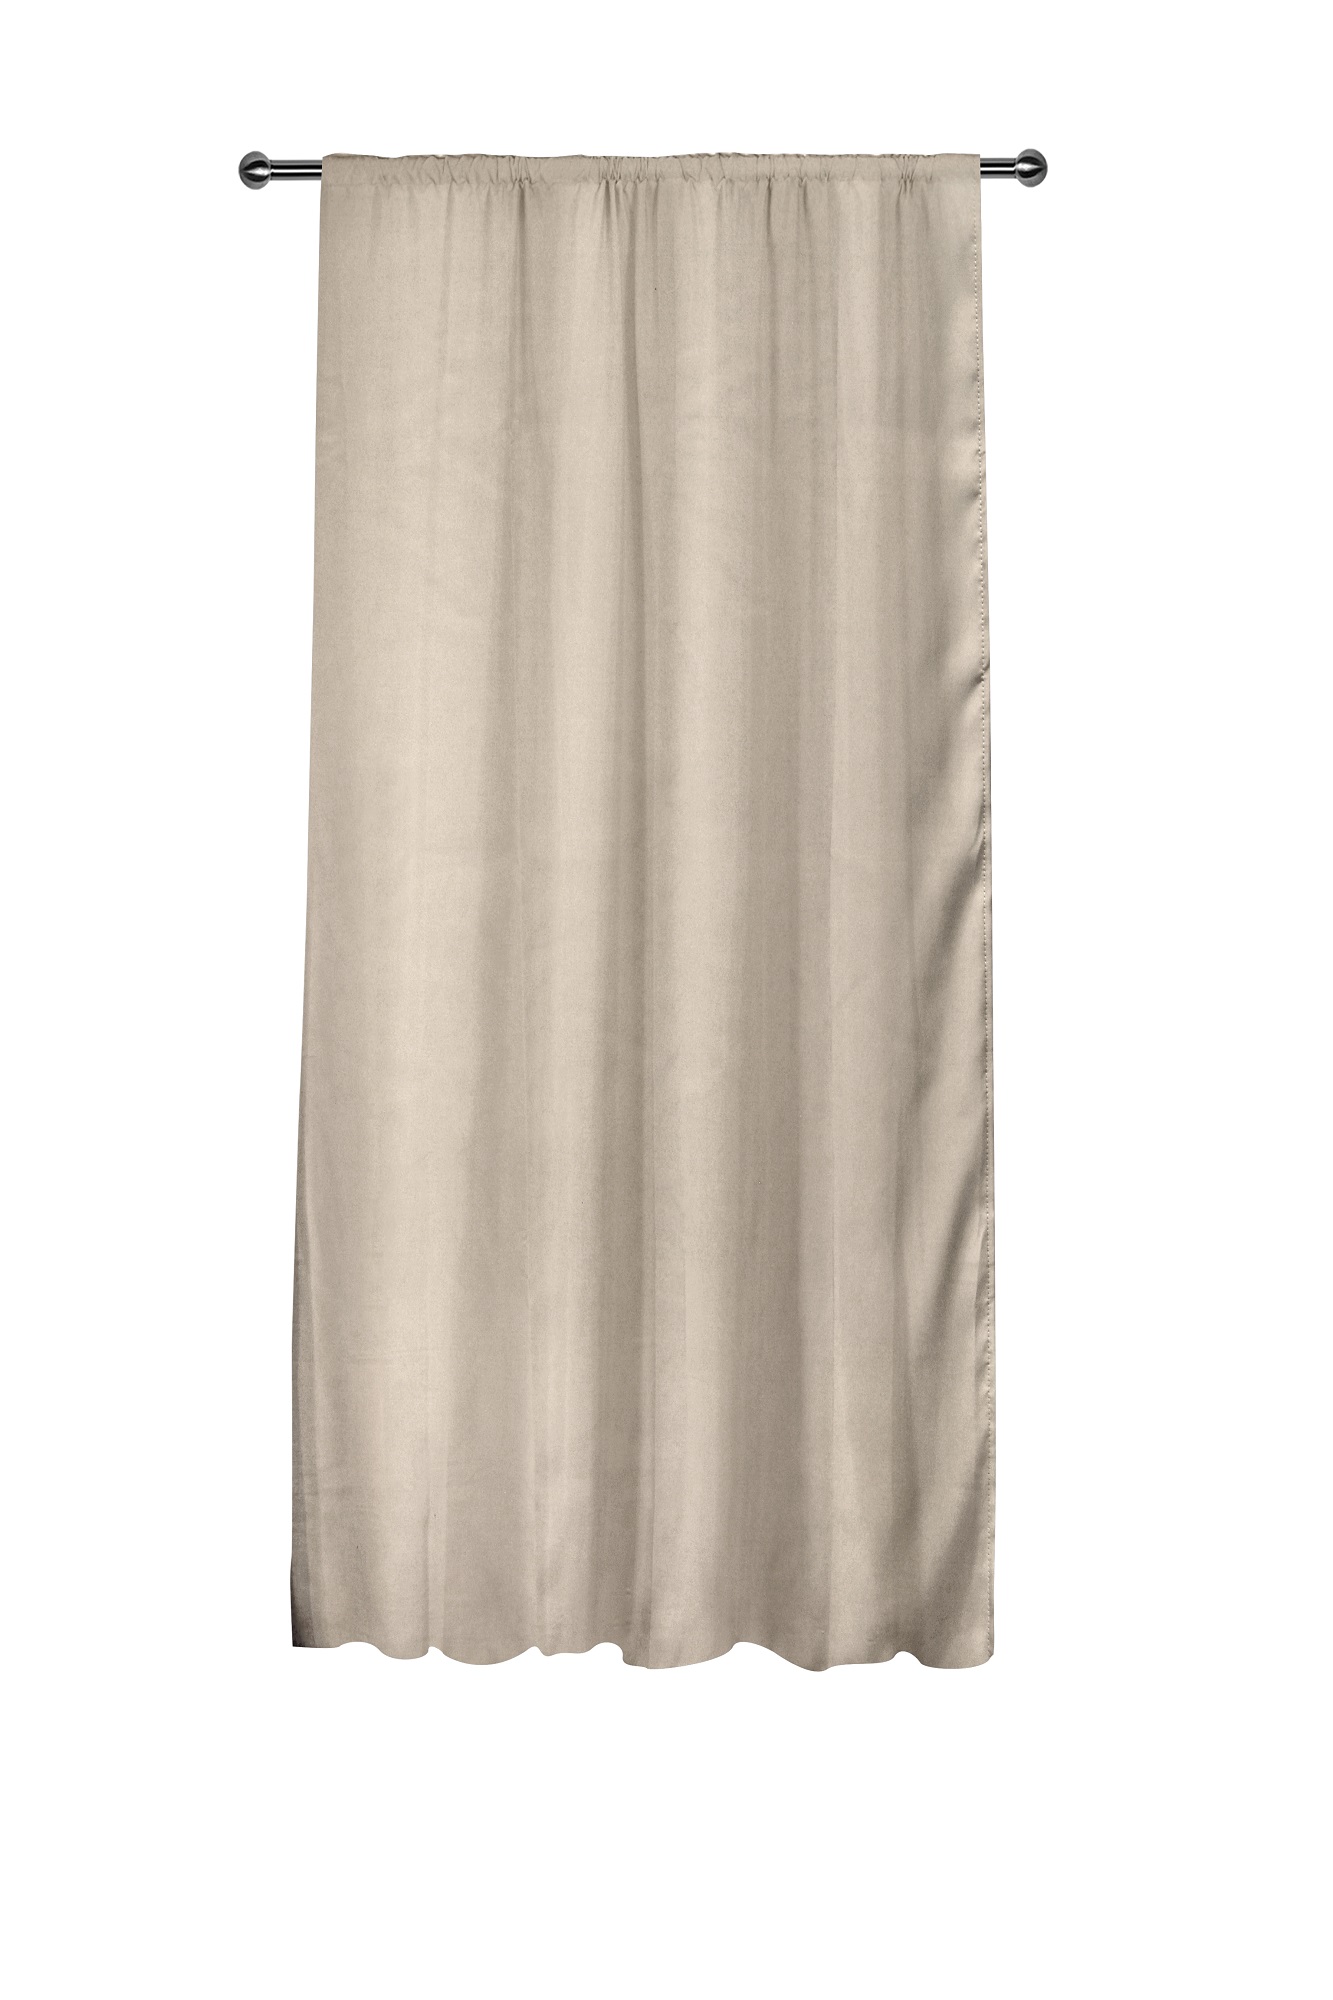 Curtain Block Out 140X270 Kirsch Taupe